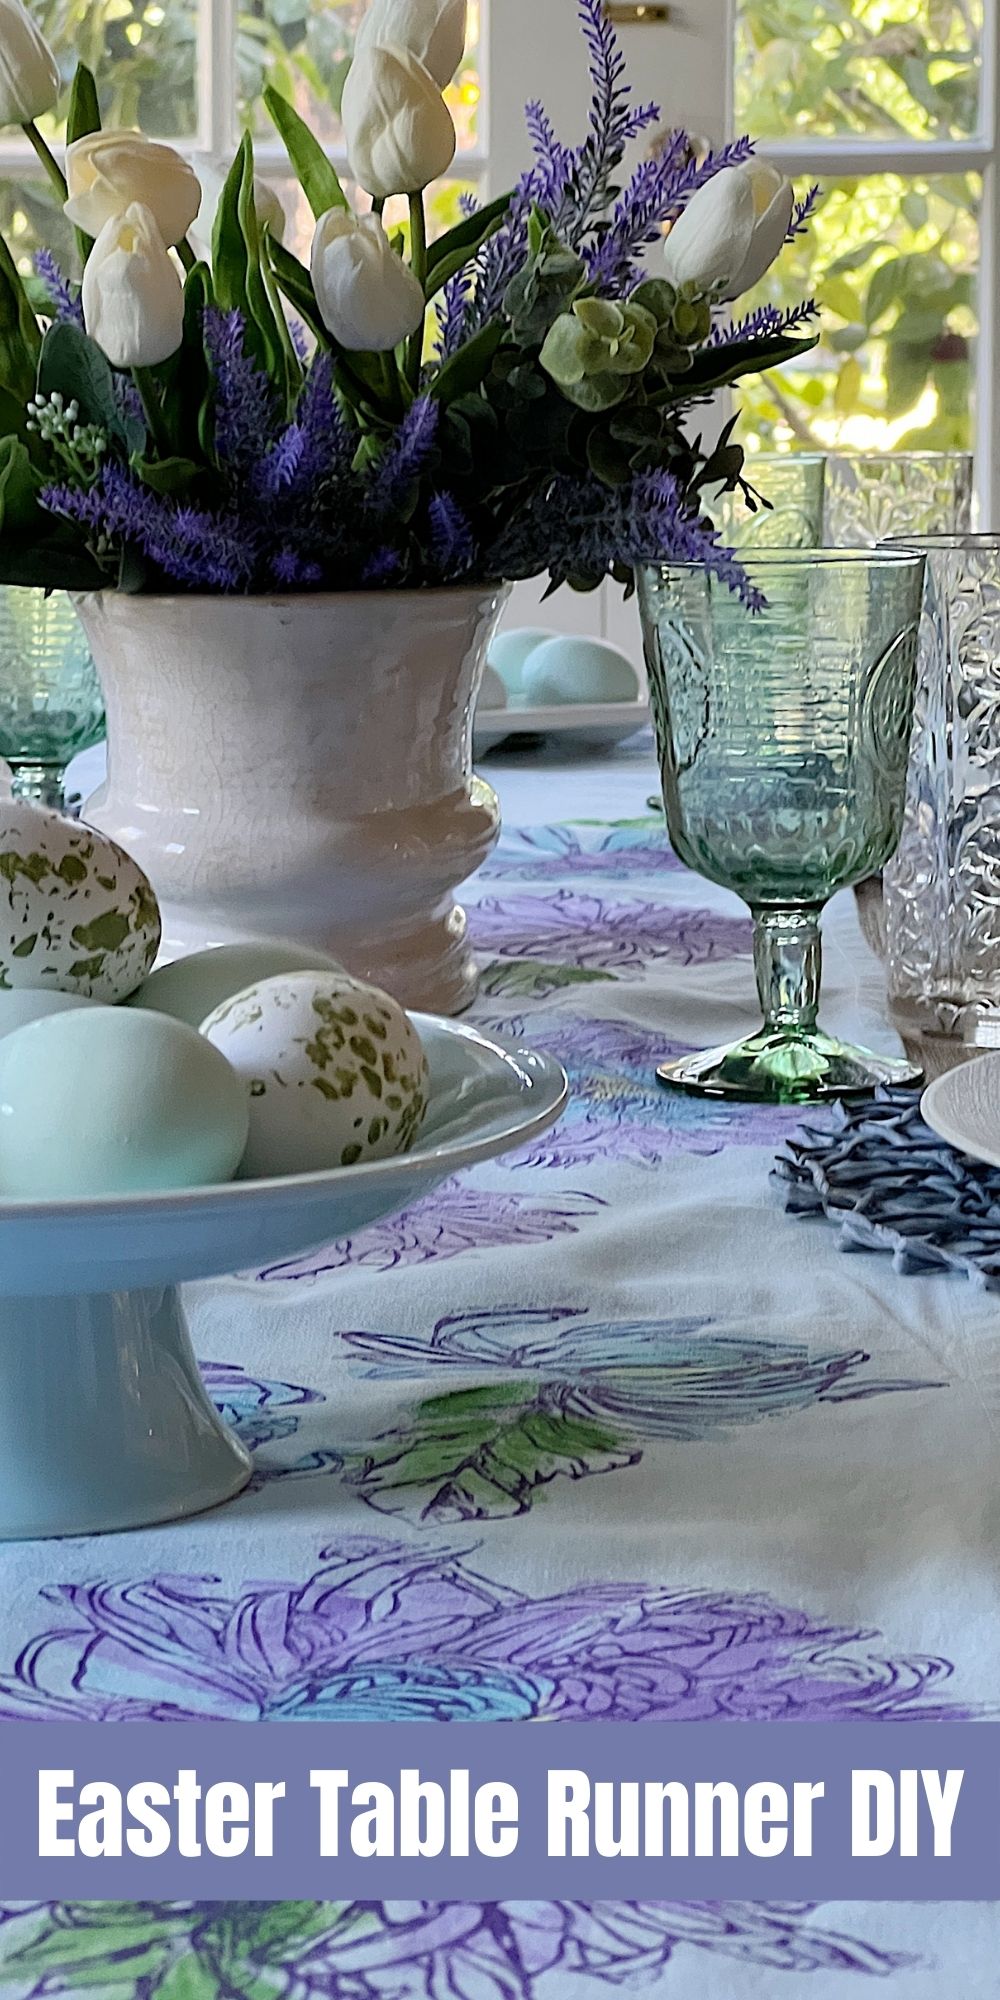 I made a beautiful Easter Table Runner using my newest technique I call paint and stamp a pillow. There are no artistic skills required.